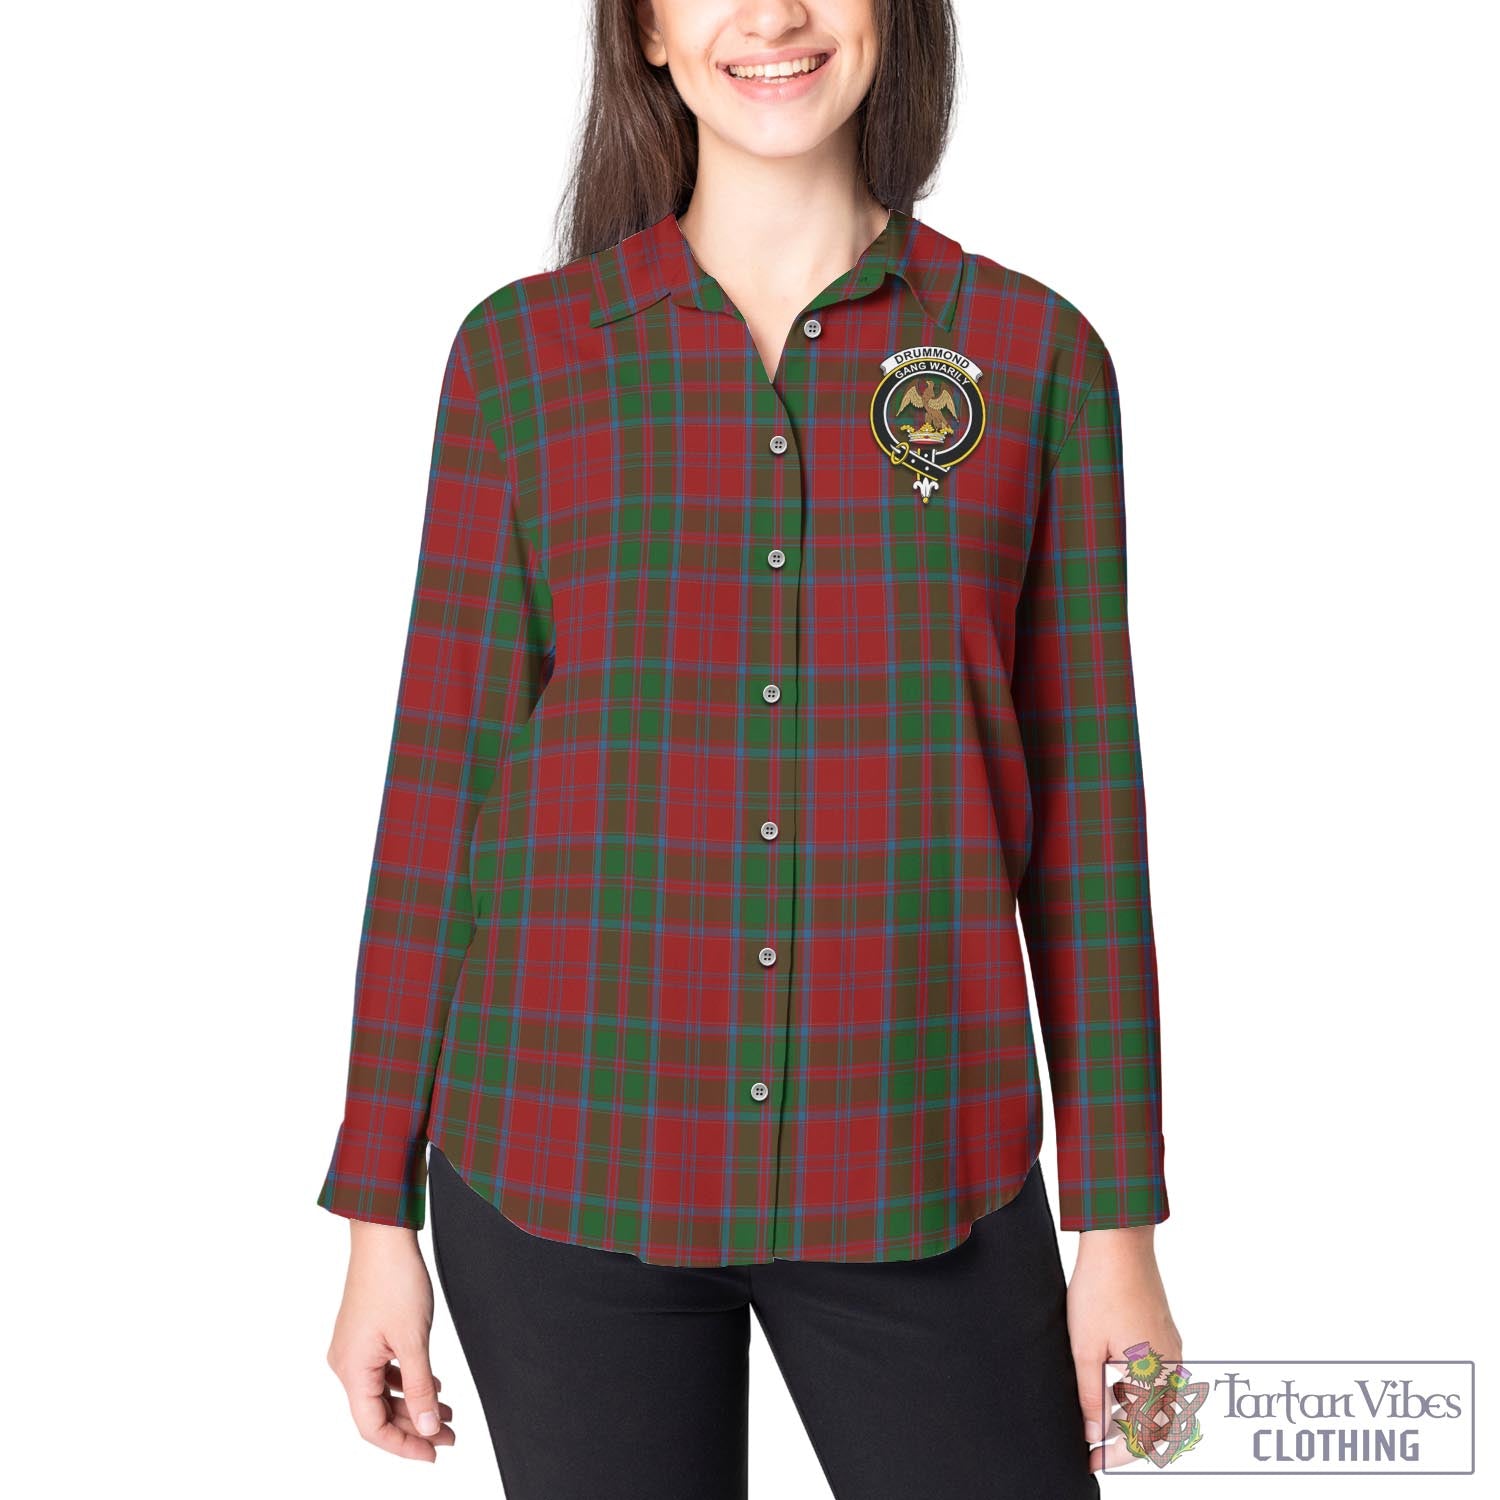 Tartan Vibes Clothing Drummond Tartan Womens Casual Shirt with Family Crest